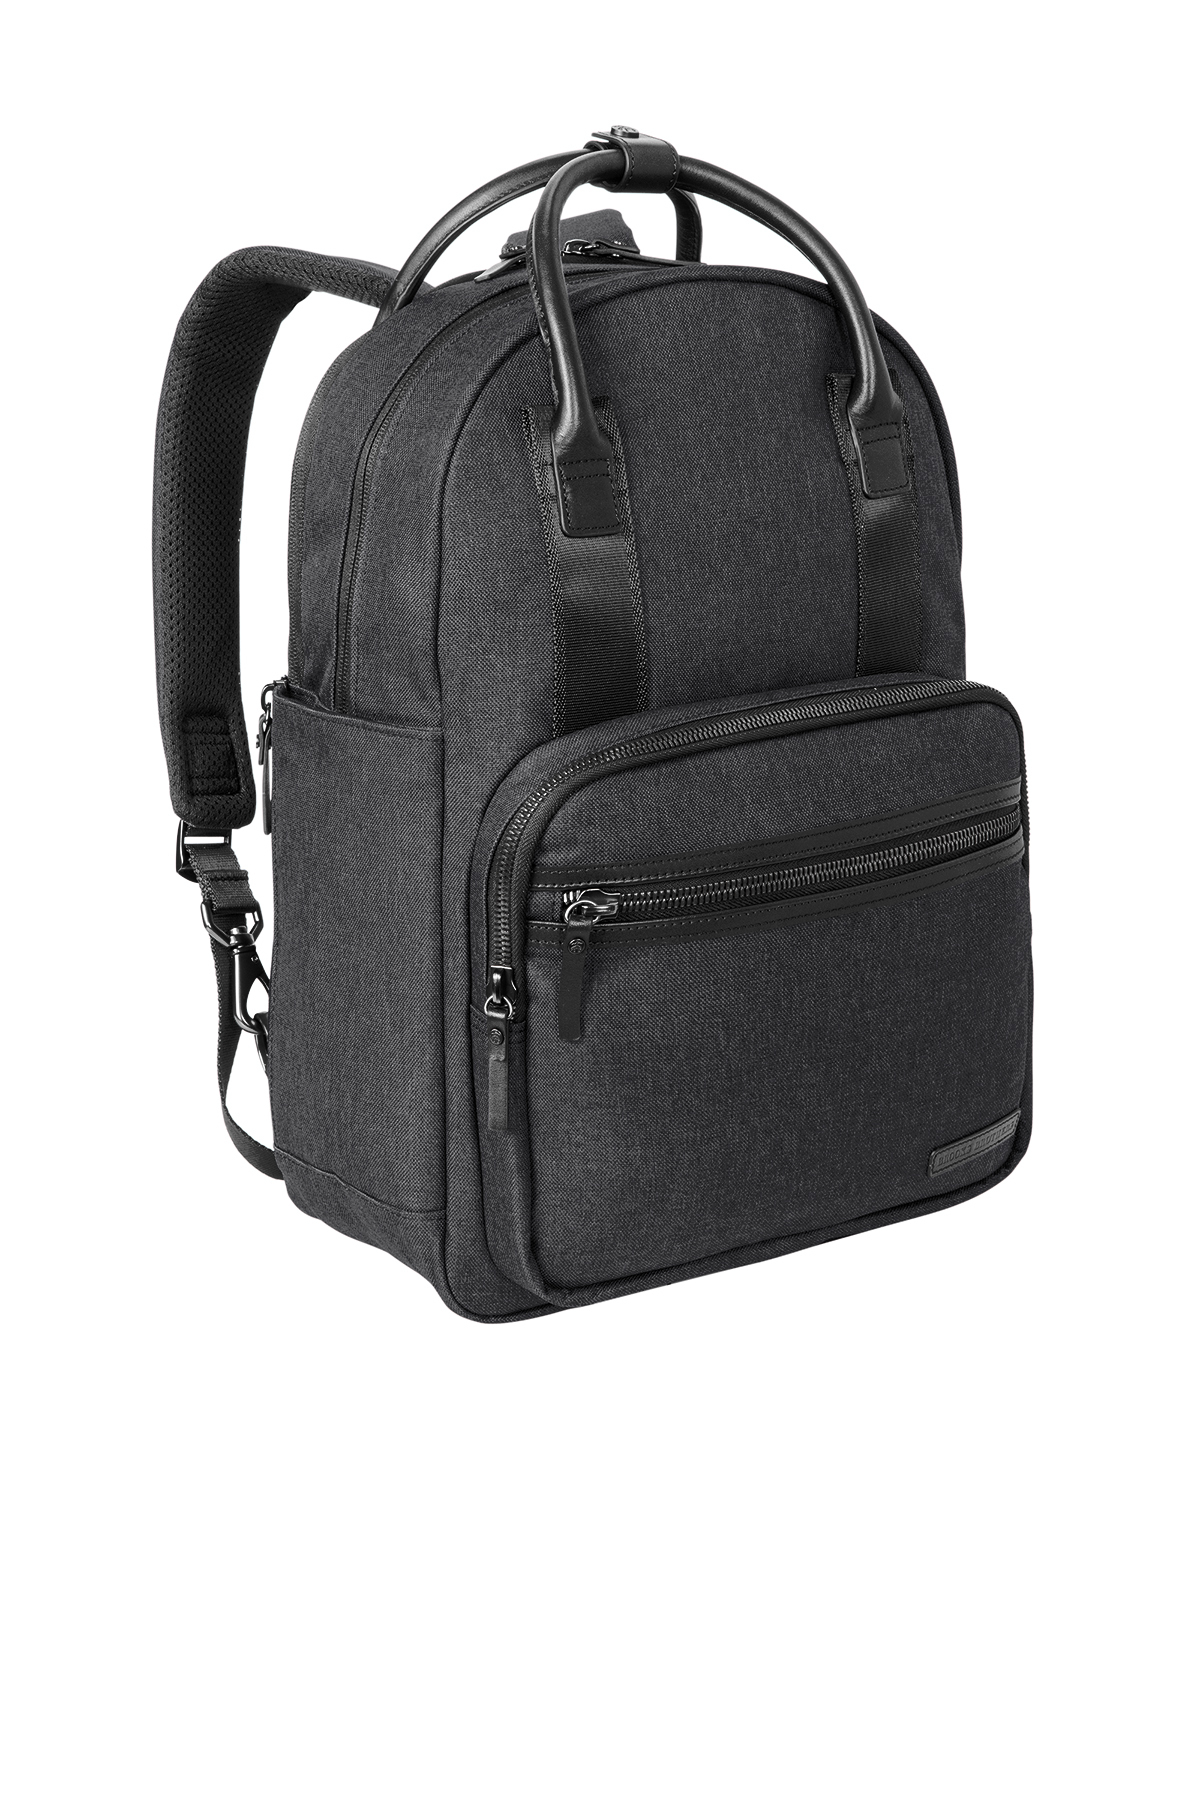 Brooks Brothers Grant Dual-Handle Backpack | Product | SanMar